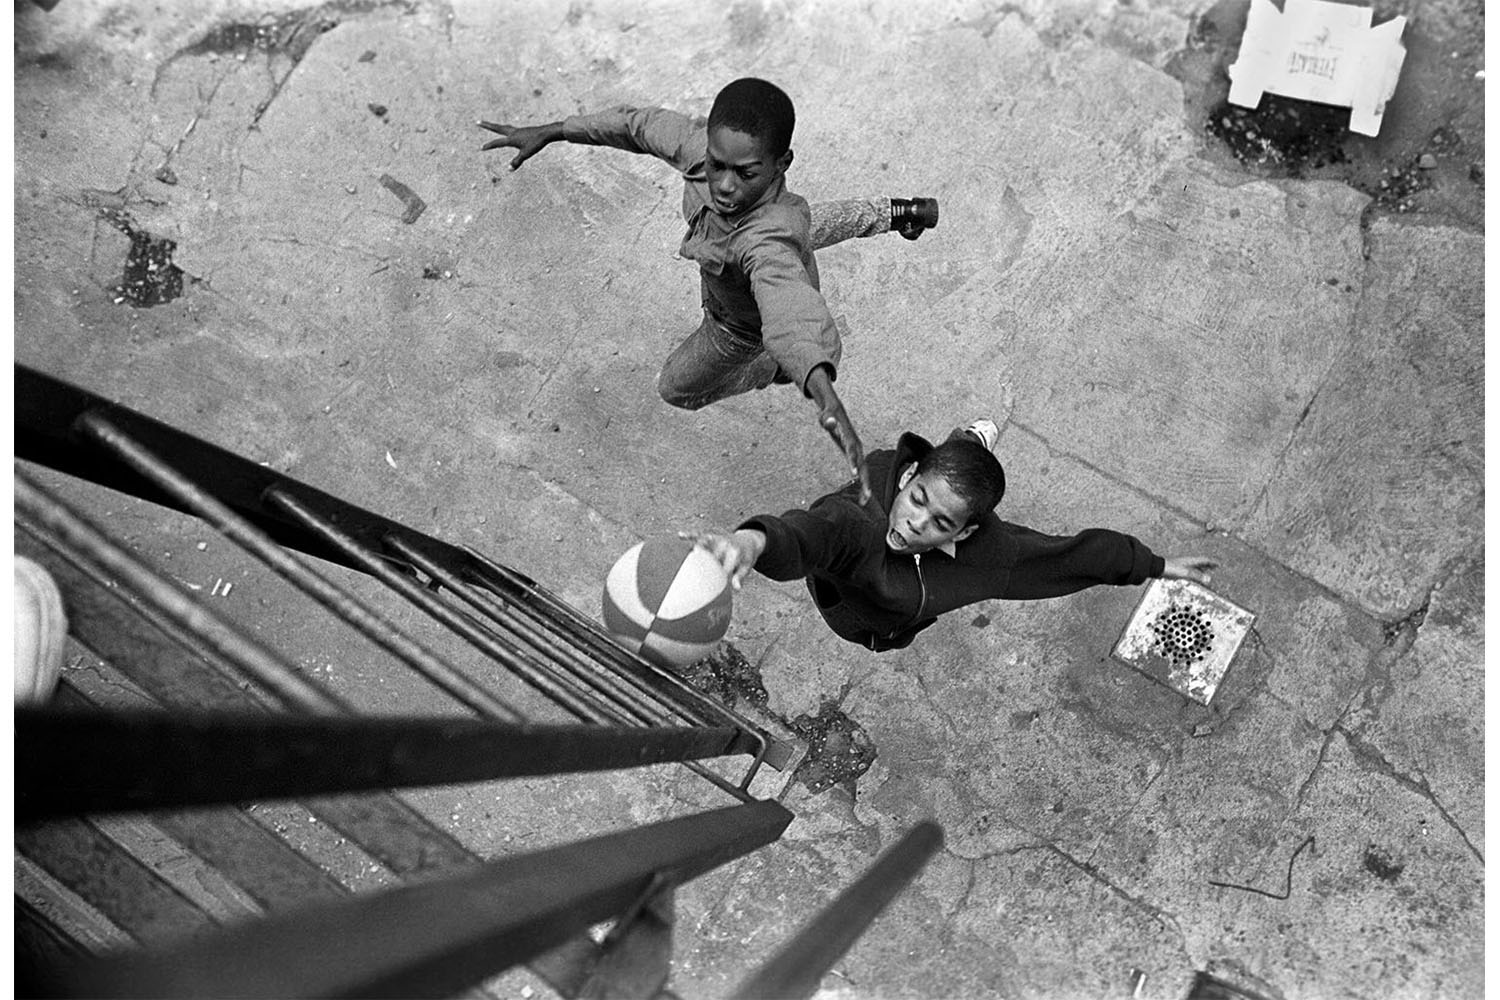 From Stephen Shames' Bronx Boys,  published by the University of Texas PressBoys play basketball, using the fireescape ladder at the hoop. 1987 - 88